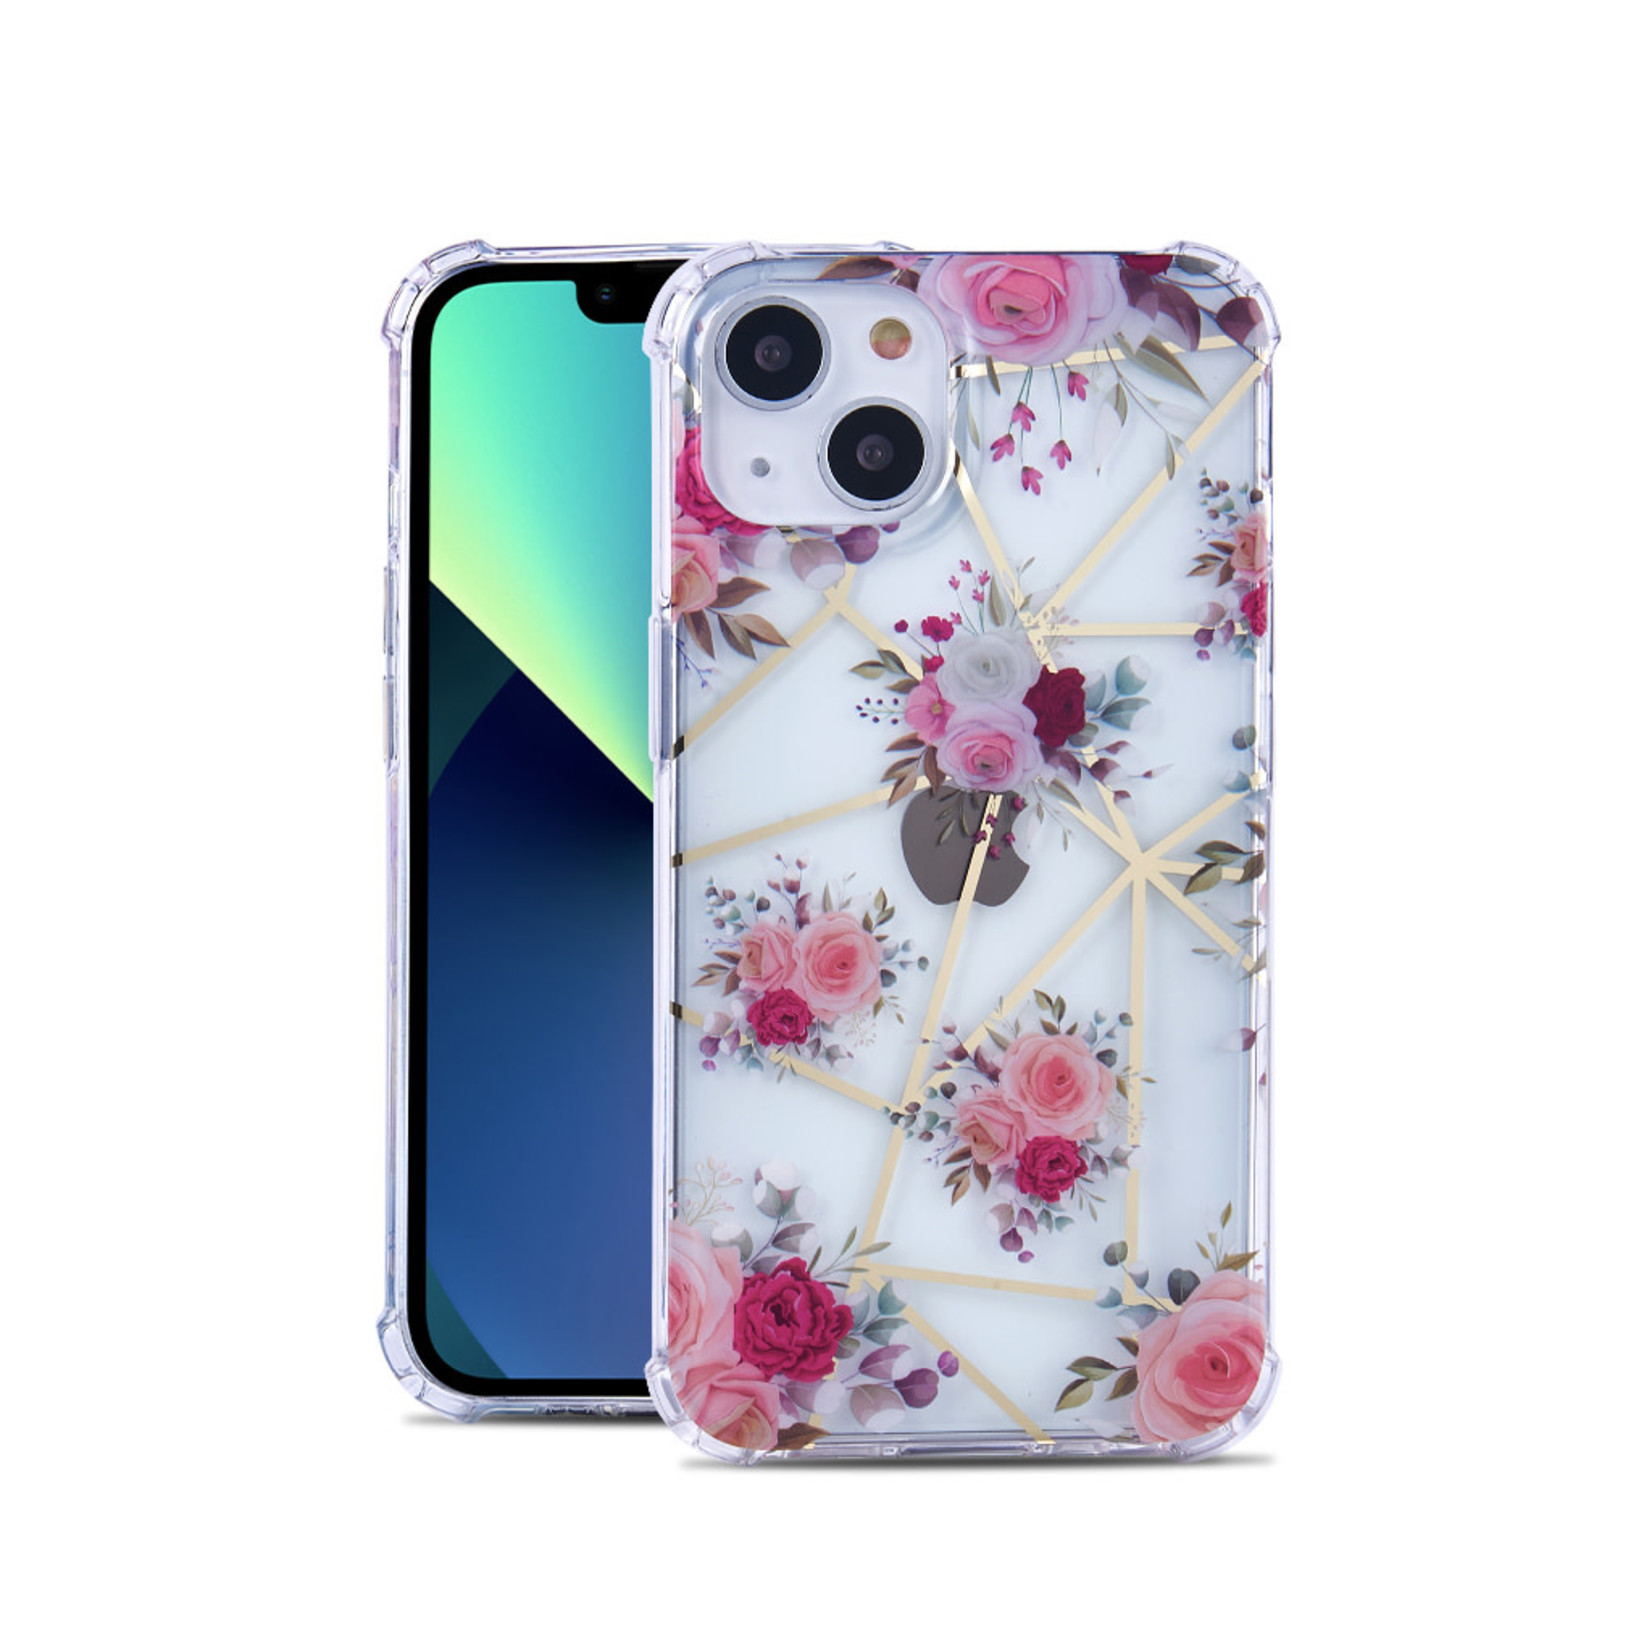 KASEAULT | Floral Fashion Shockproof TPU Cover Case for iPhone 13 Pro Max Retail Packaging Bouquet